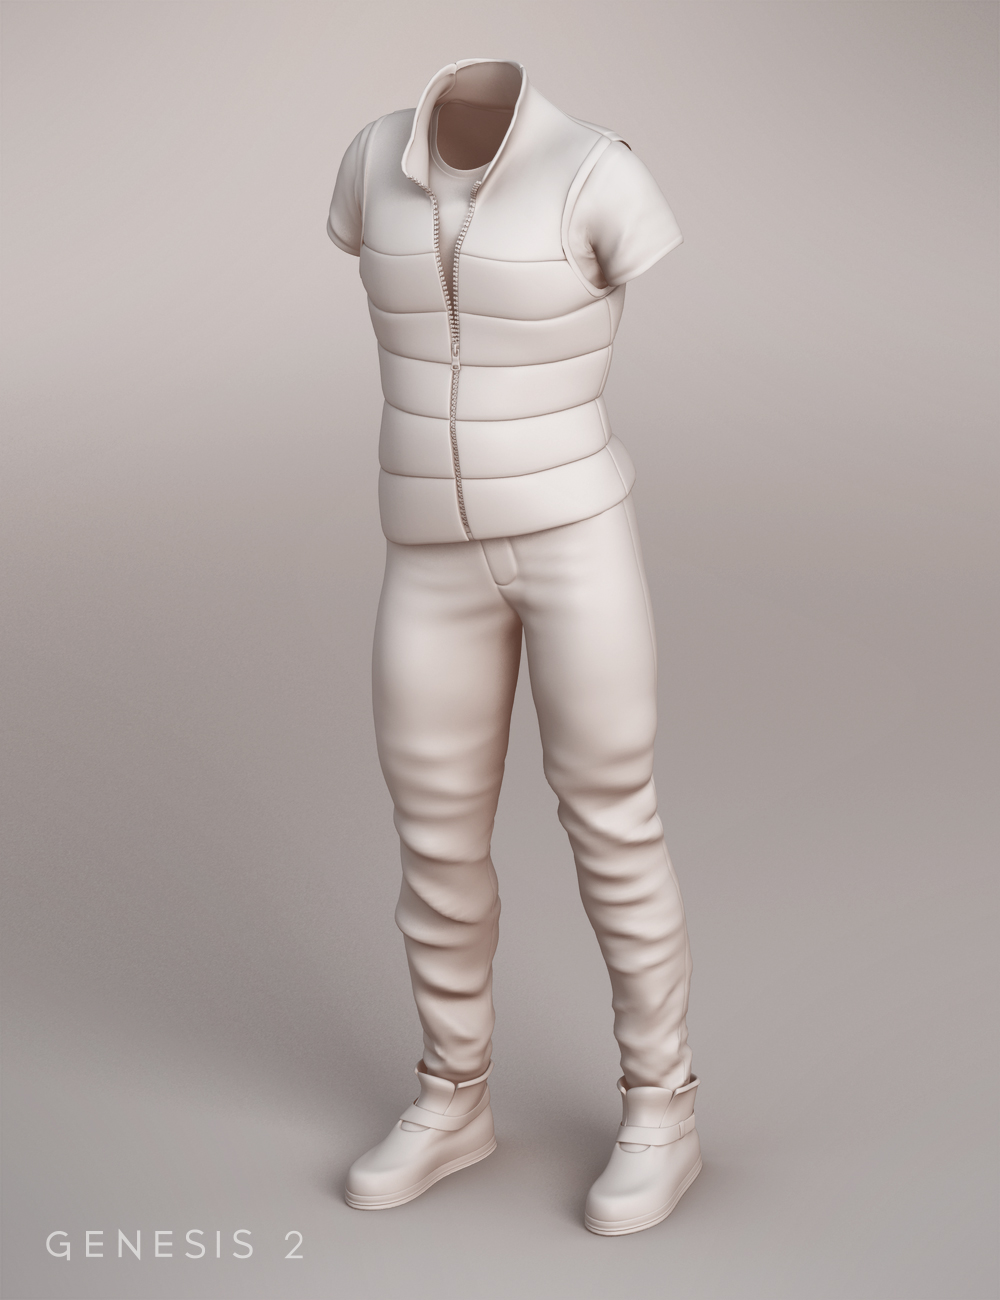 Urban Metro Outfit for Genesis 2 Male(s) by: NikisatezDarkStarBurning, 3D Models by Daz 3D